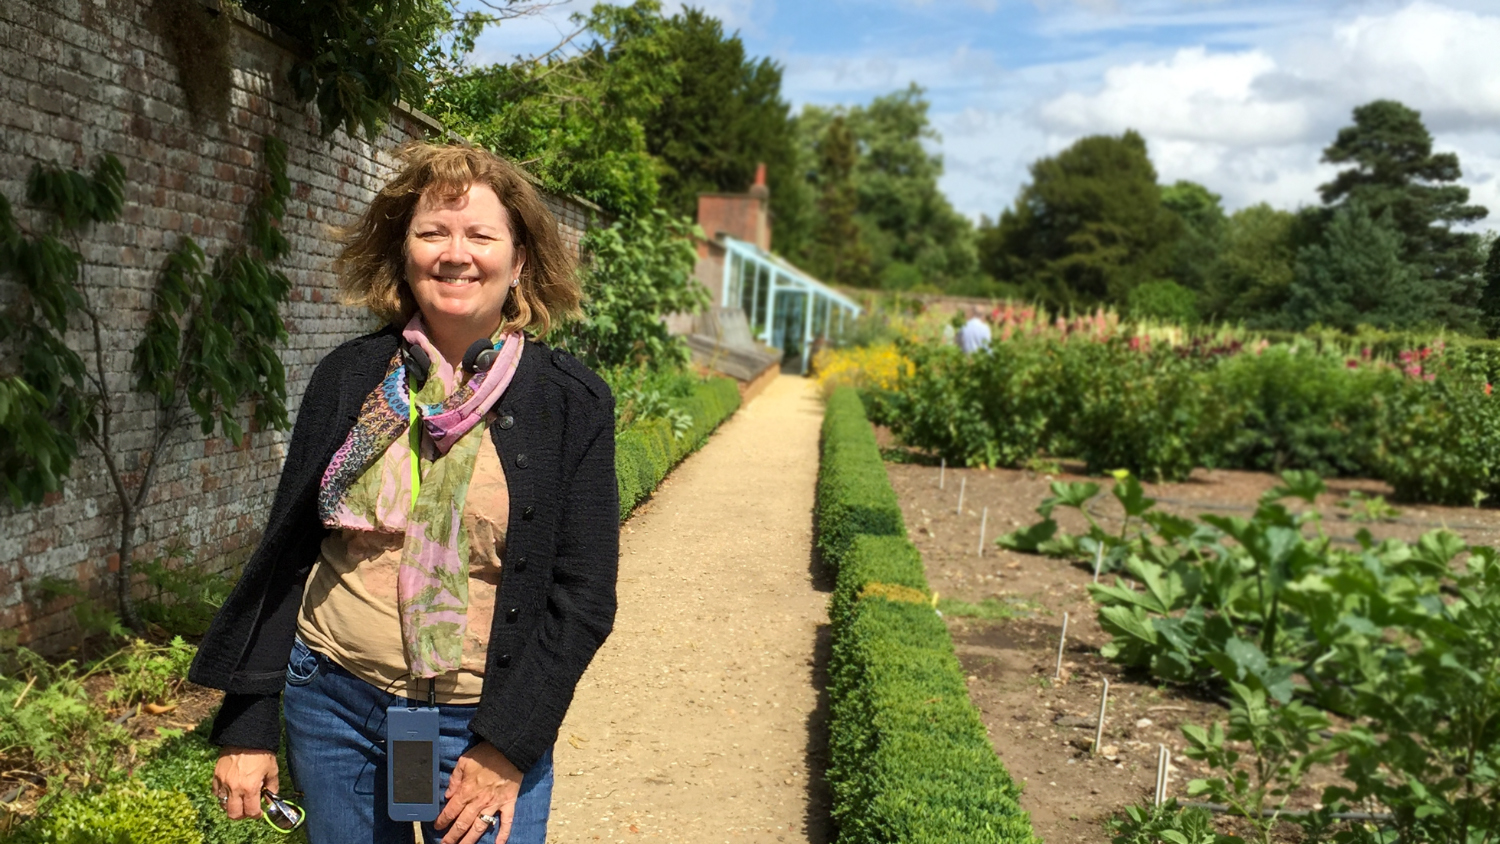 Jean Ristaino stands next to potato plots in the backyard of Down House, Charles Darwin's home.